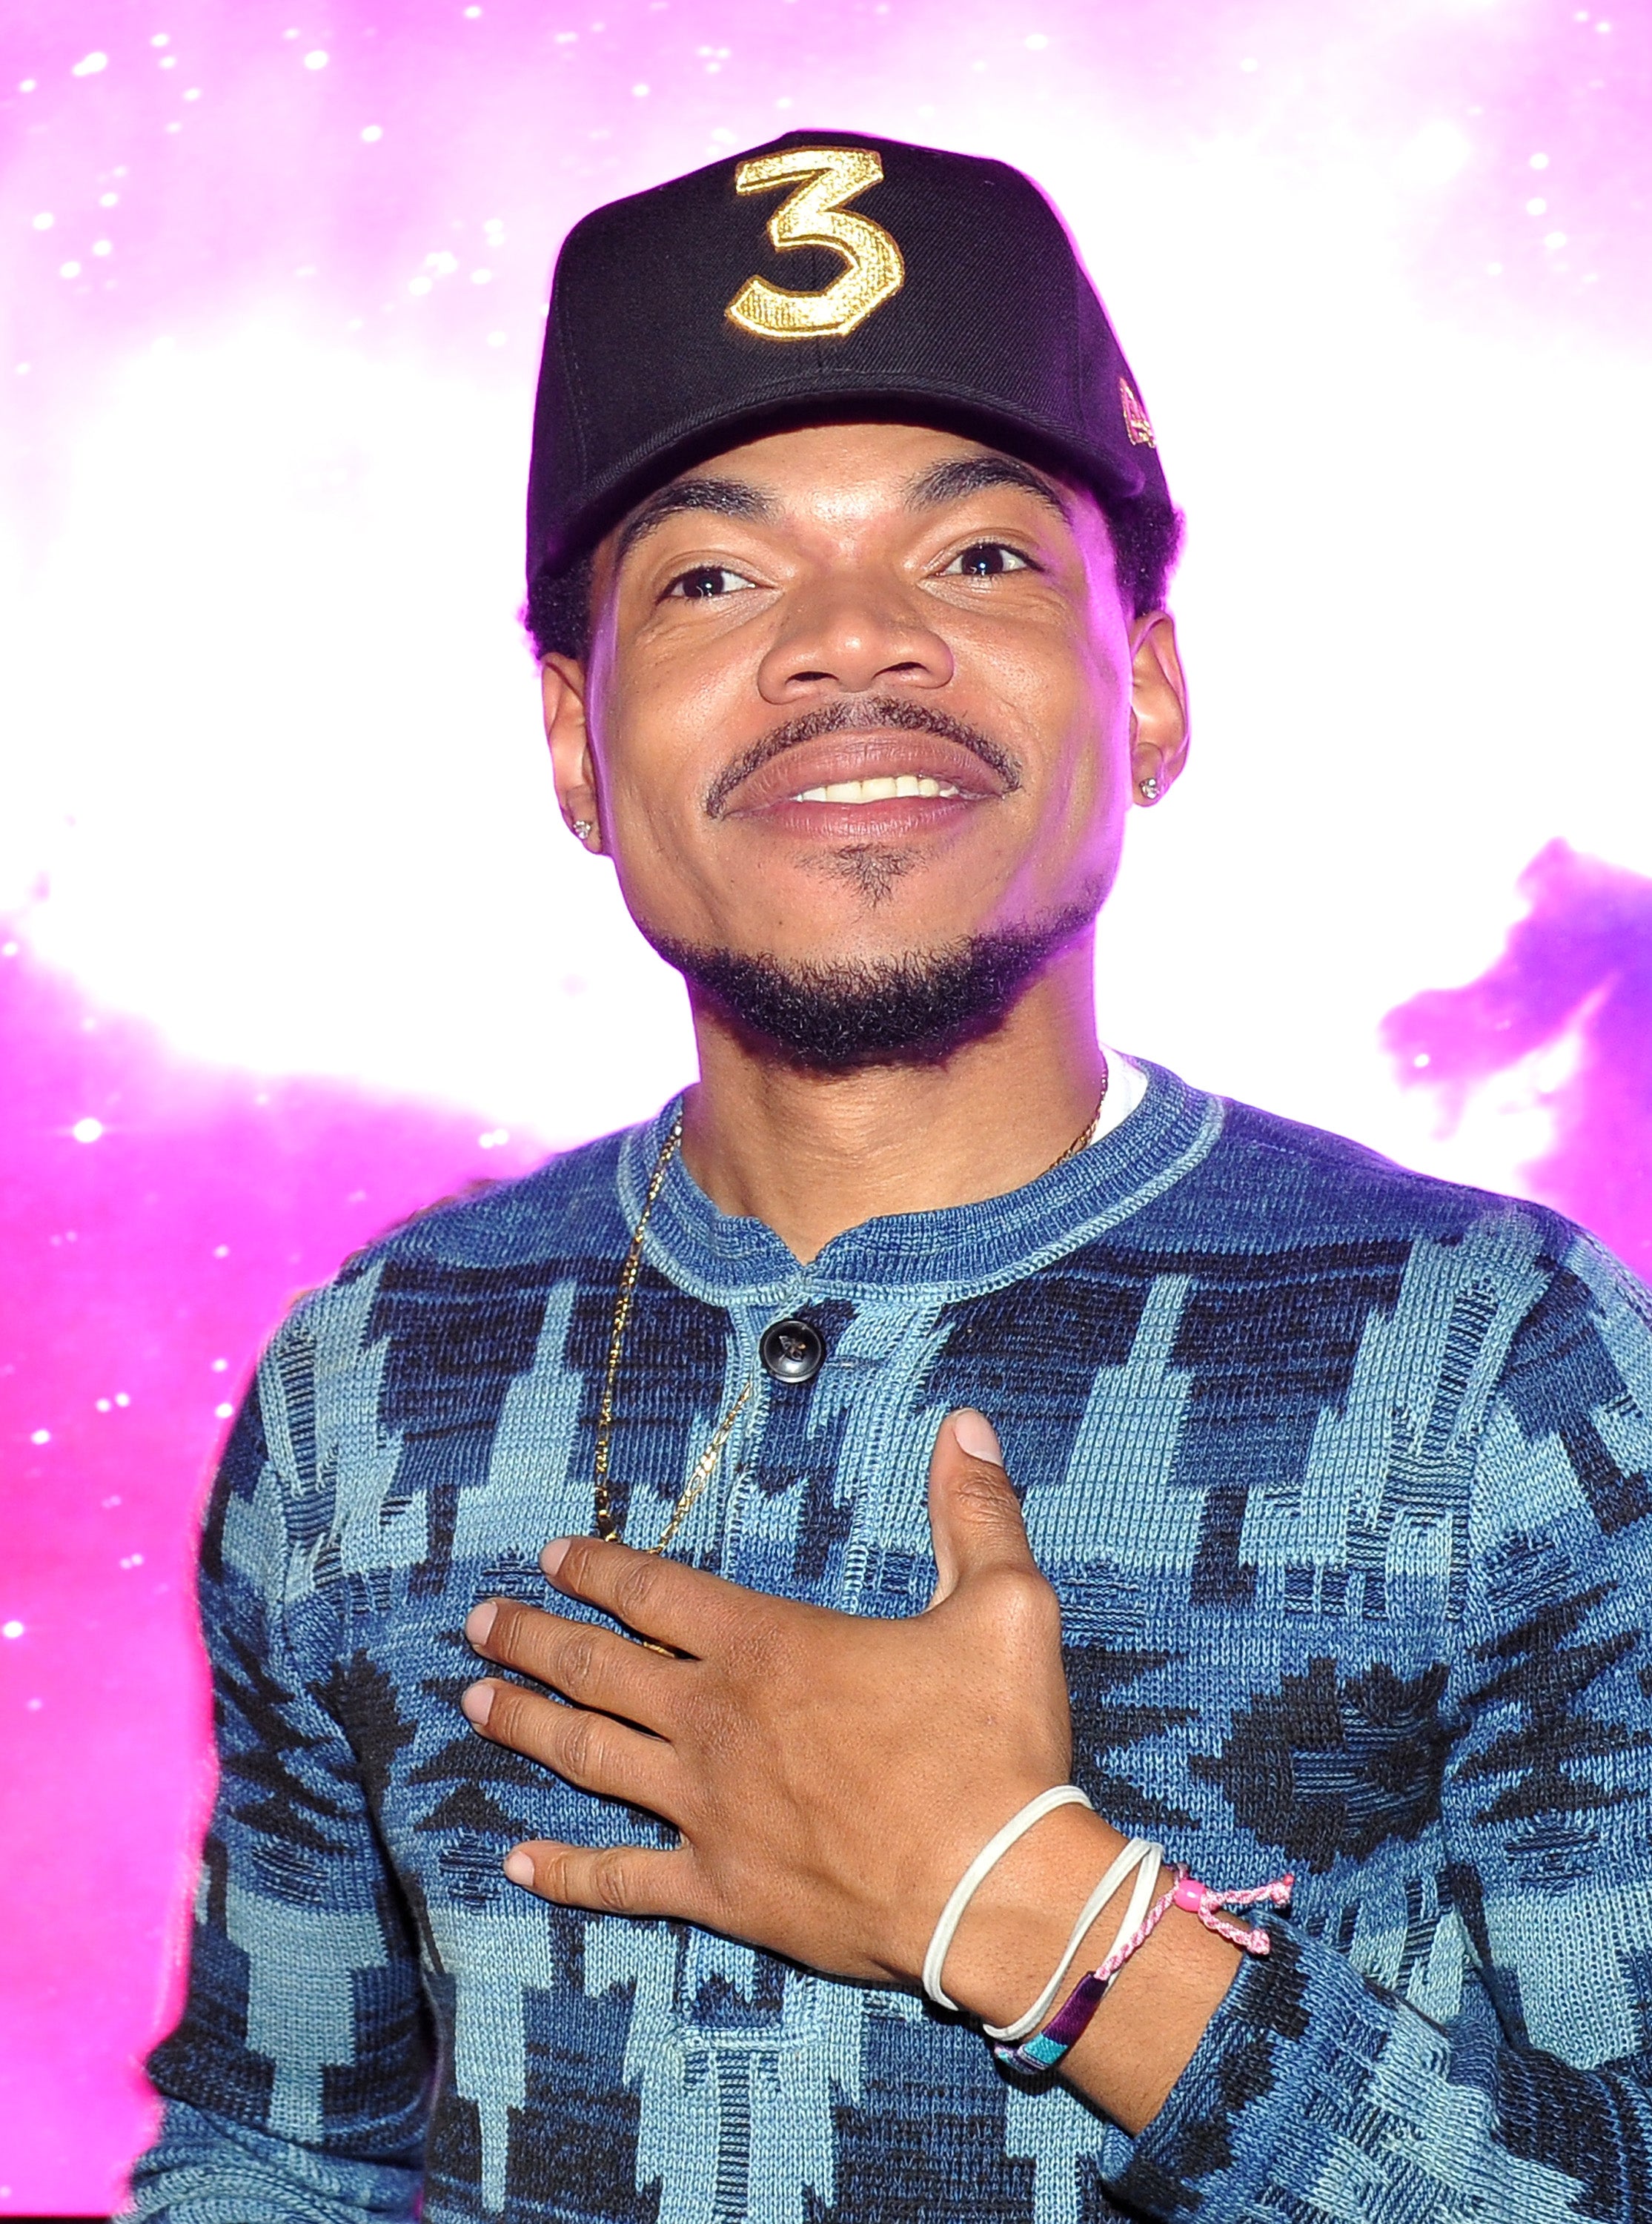 Chance the Rapper Treats South Side Chicago Residents To Free 'Get Out' Screenings
